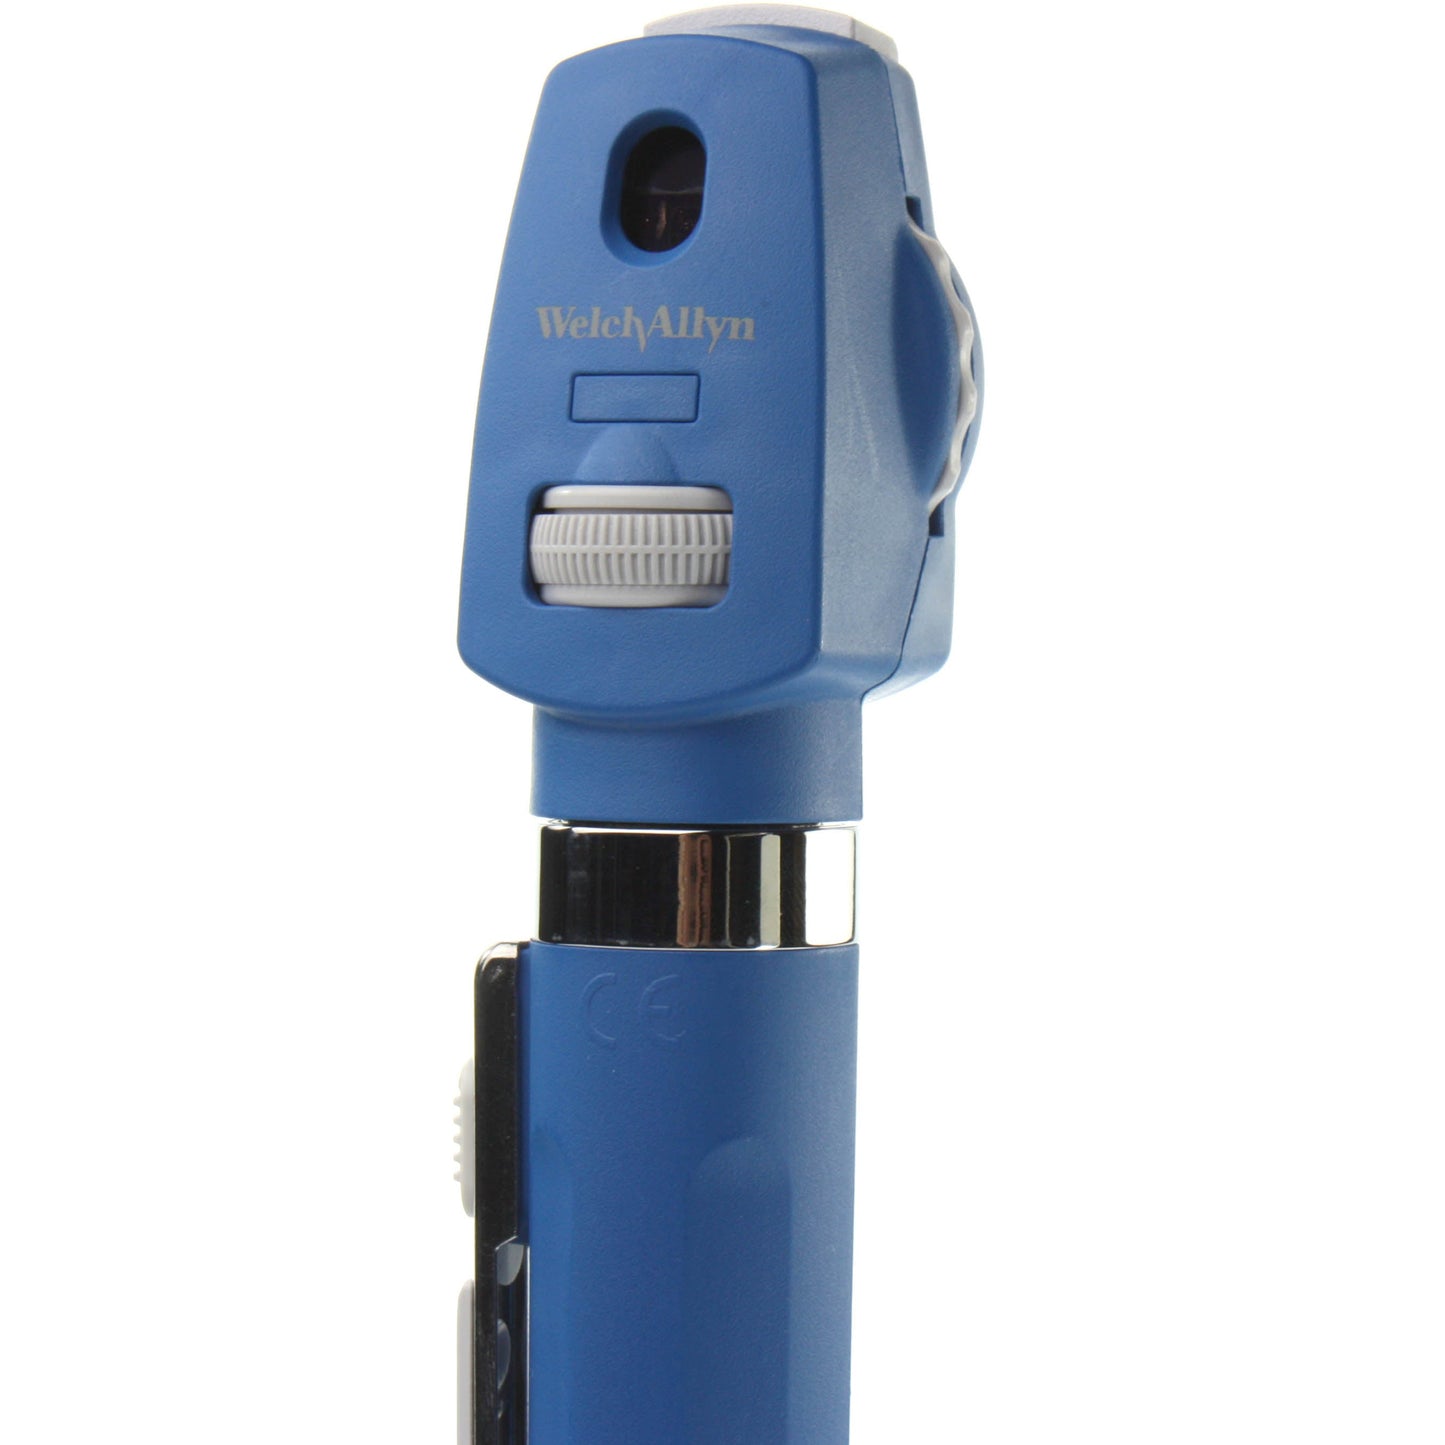 Welch Allyn Pocket LED Ophthalmoscope - Blueberry